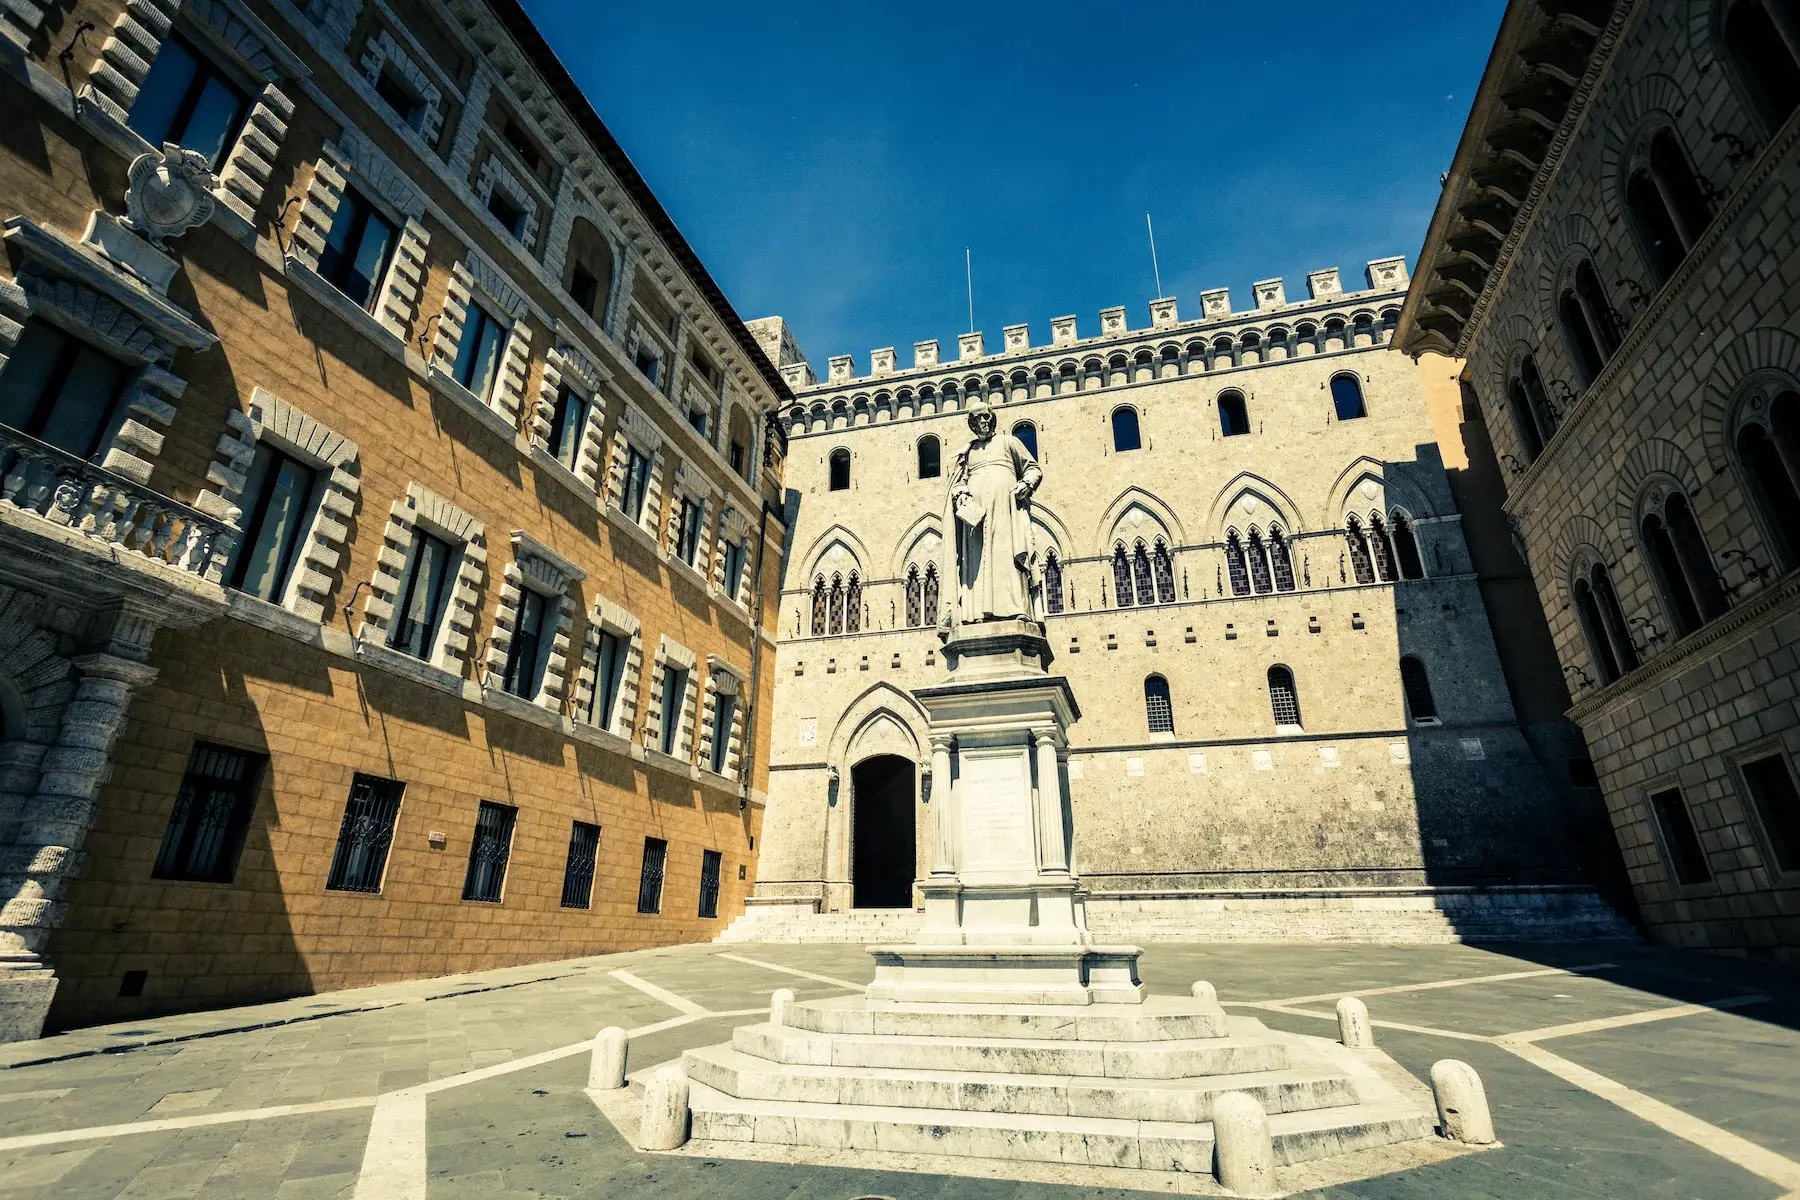 A statue in front of Banca Monte dei Paschi di Siena, the world's oldest bank